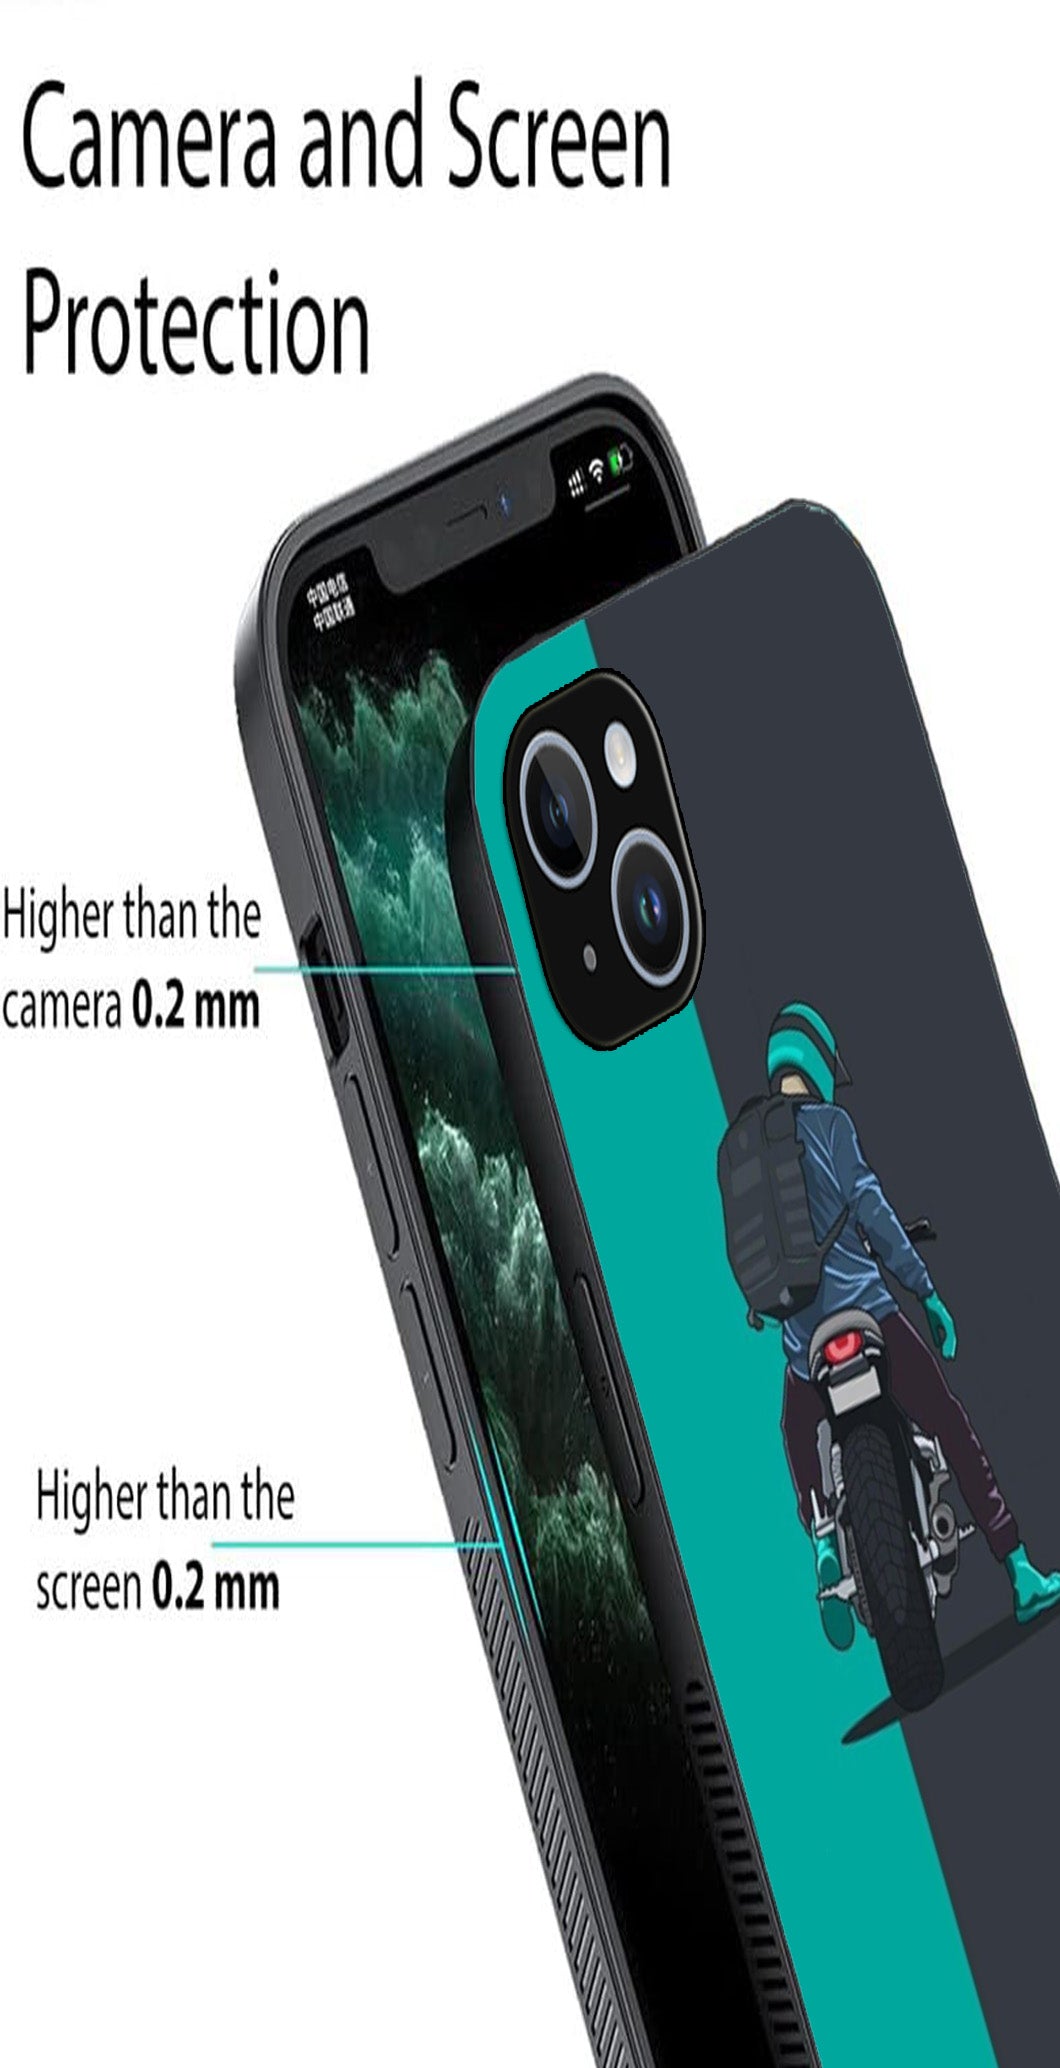 Bike Lover Metal Mobile Case for iPhone 13